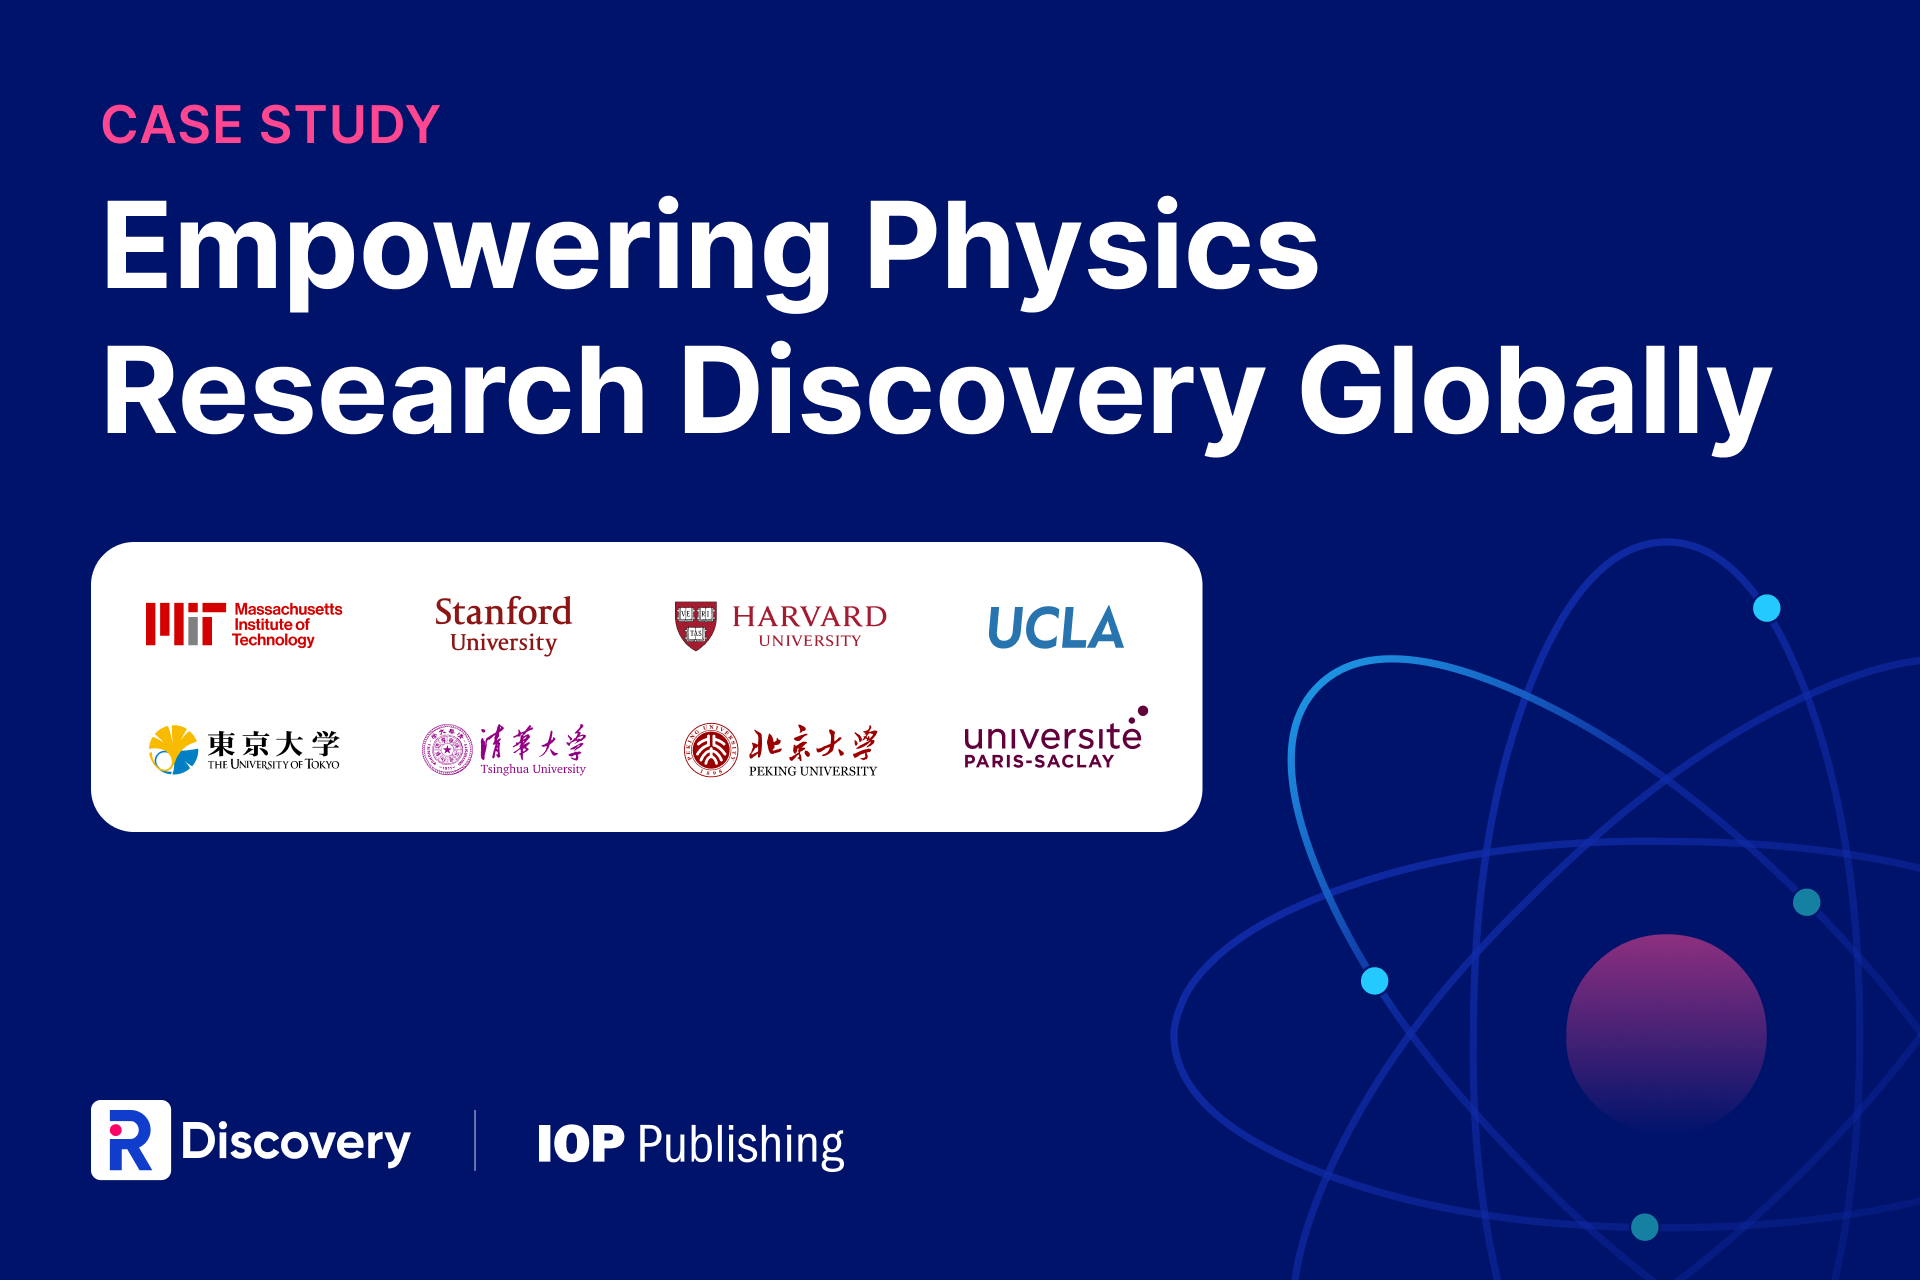 R Discovery Empowers Physics Researchers from Top Global Universities by Improving Access to IOP Publishing Journals